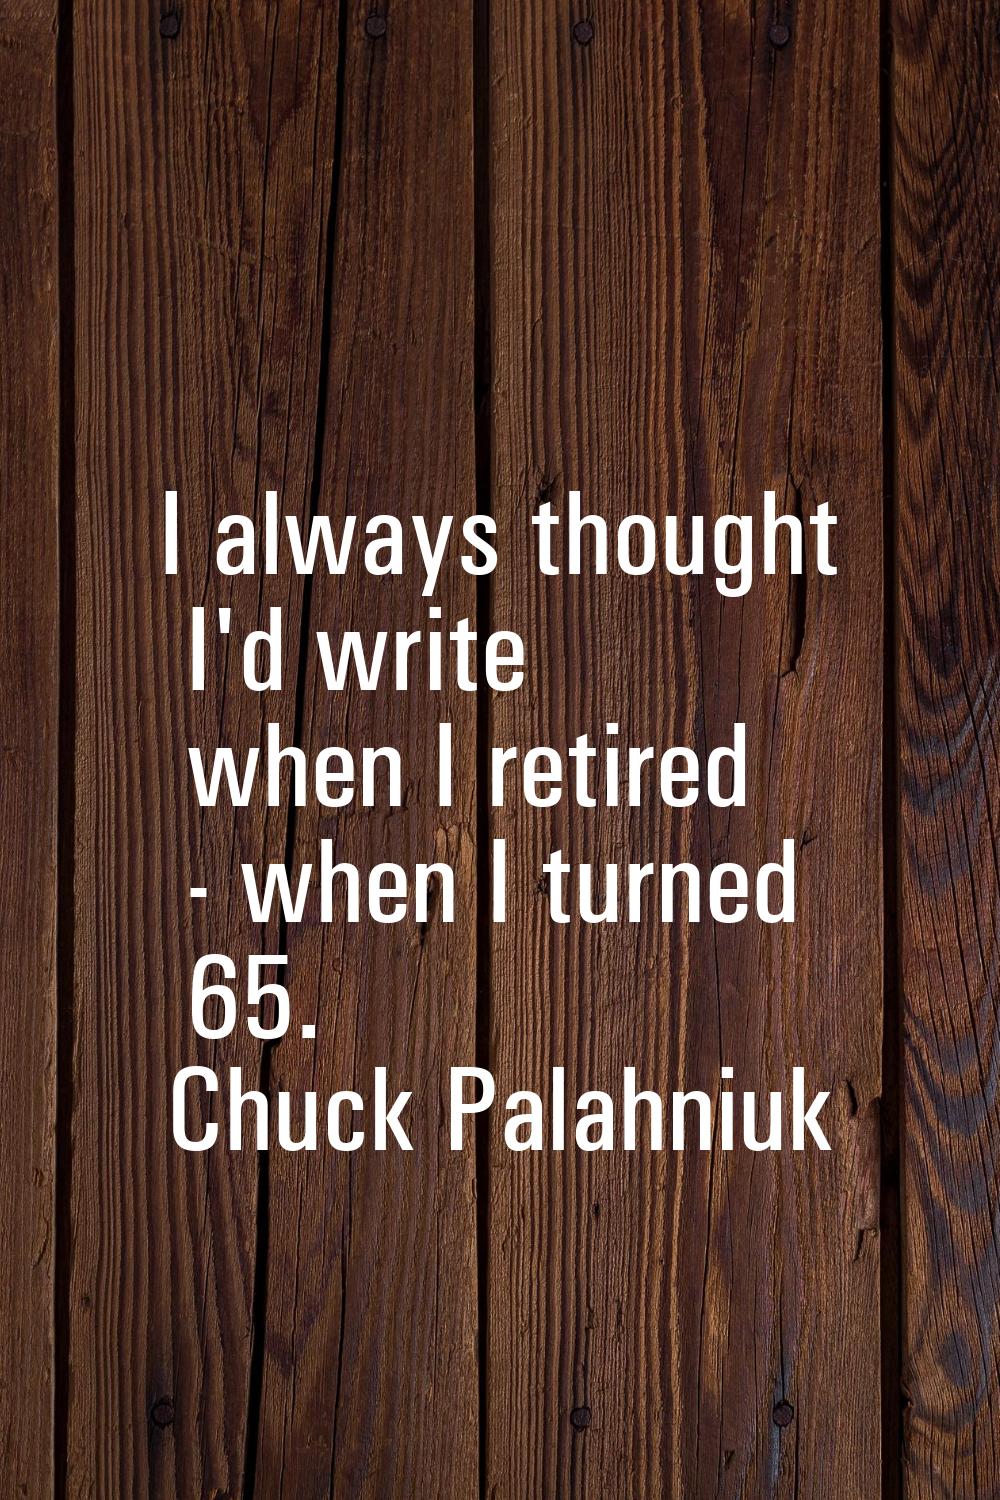 I always thought I'd write when I retired - when I turned 65.